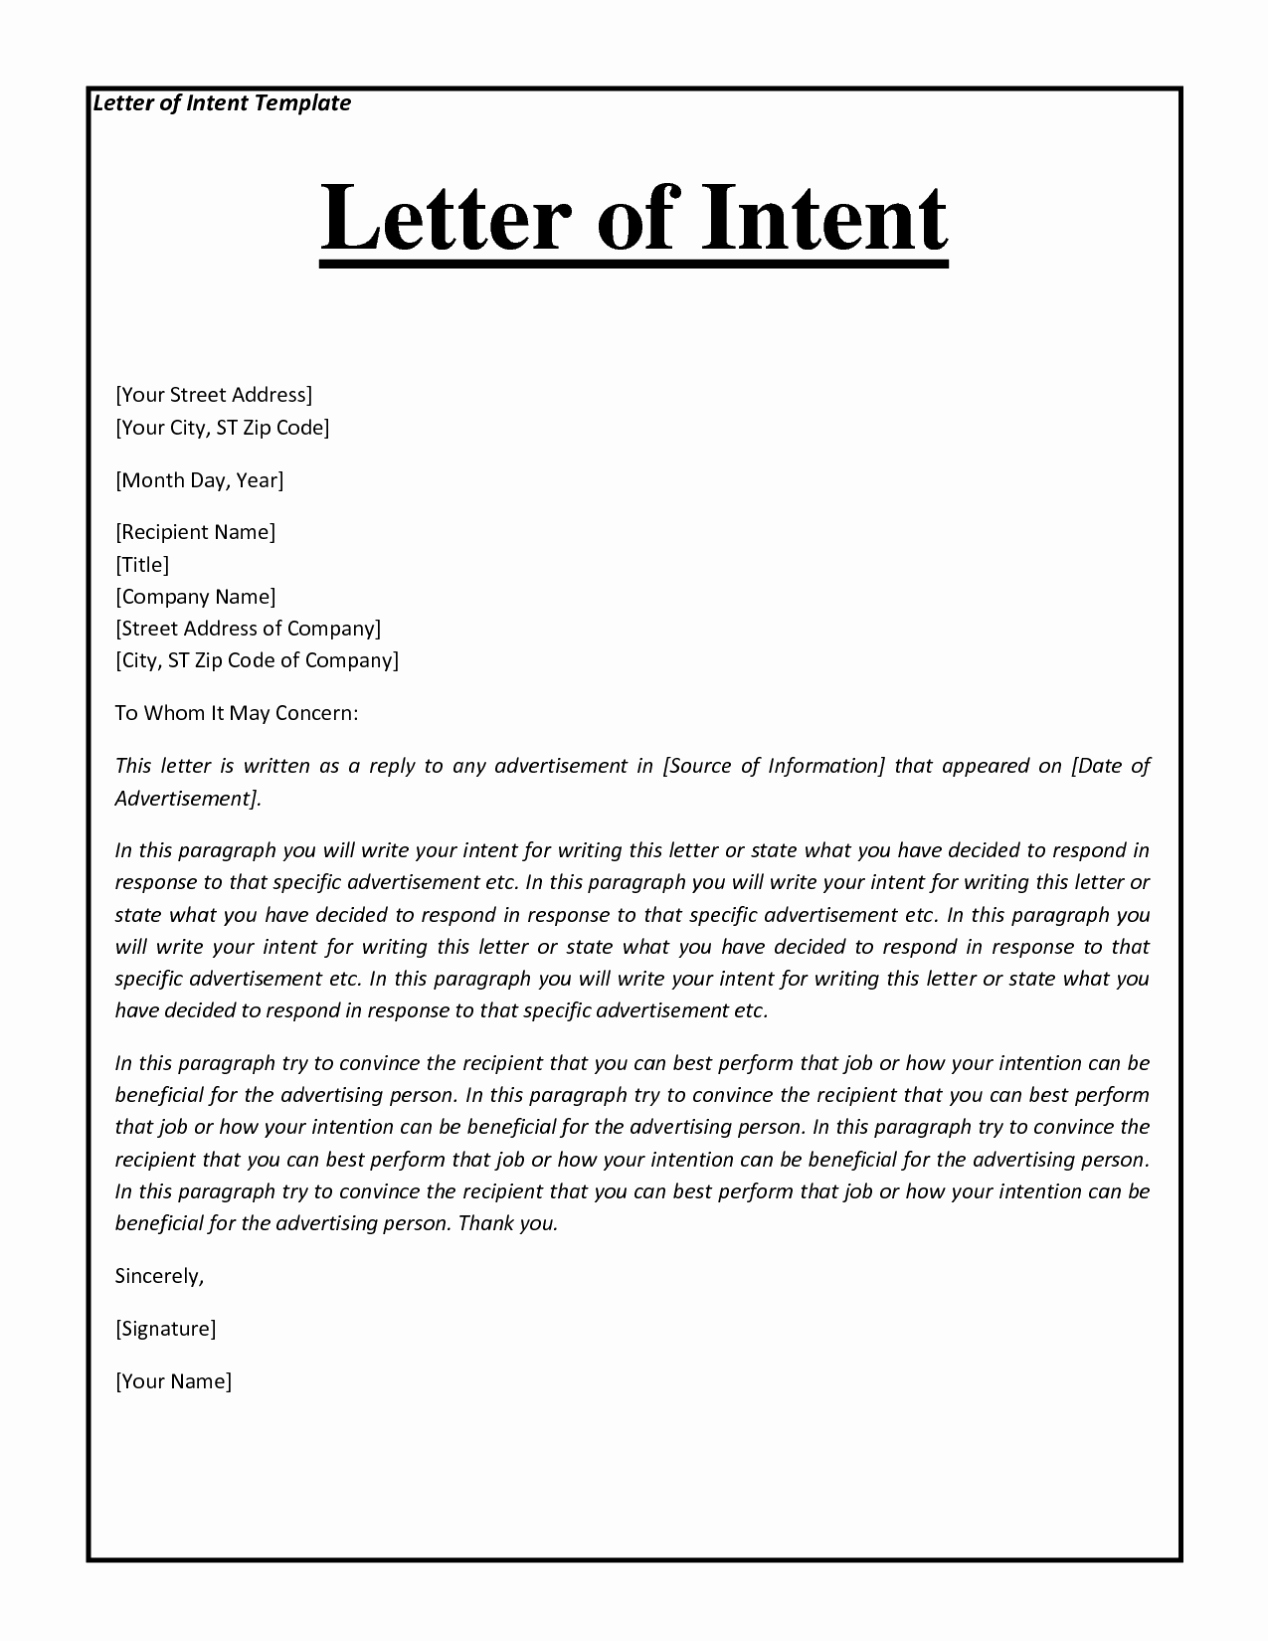 Sample Letter Of Intent for Business